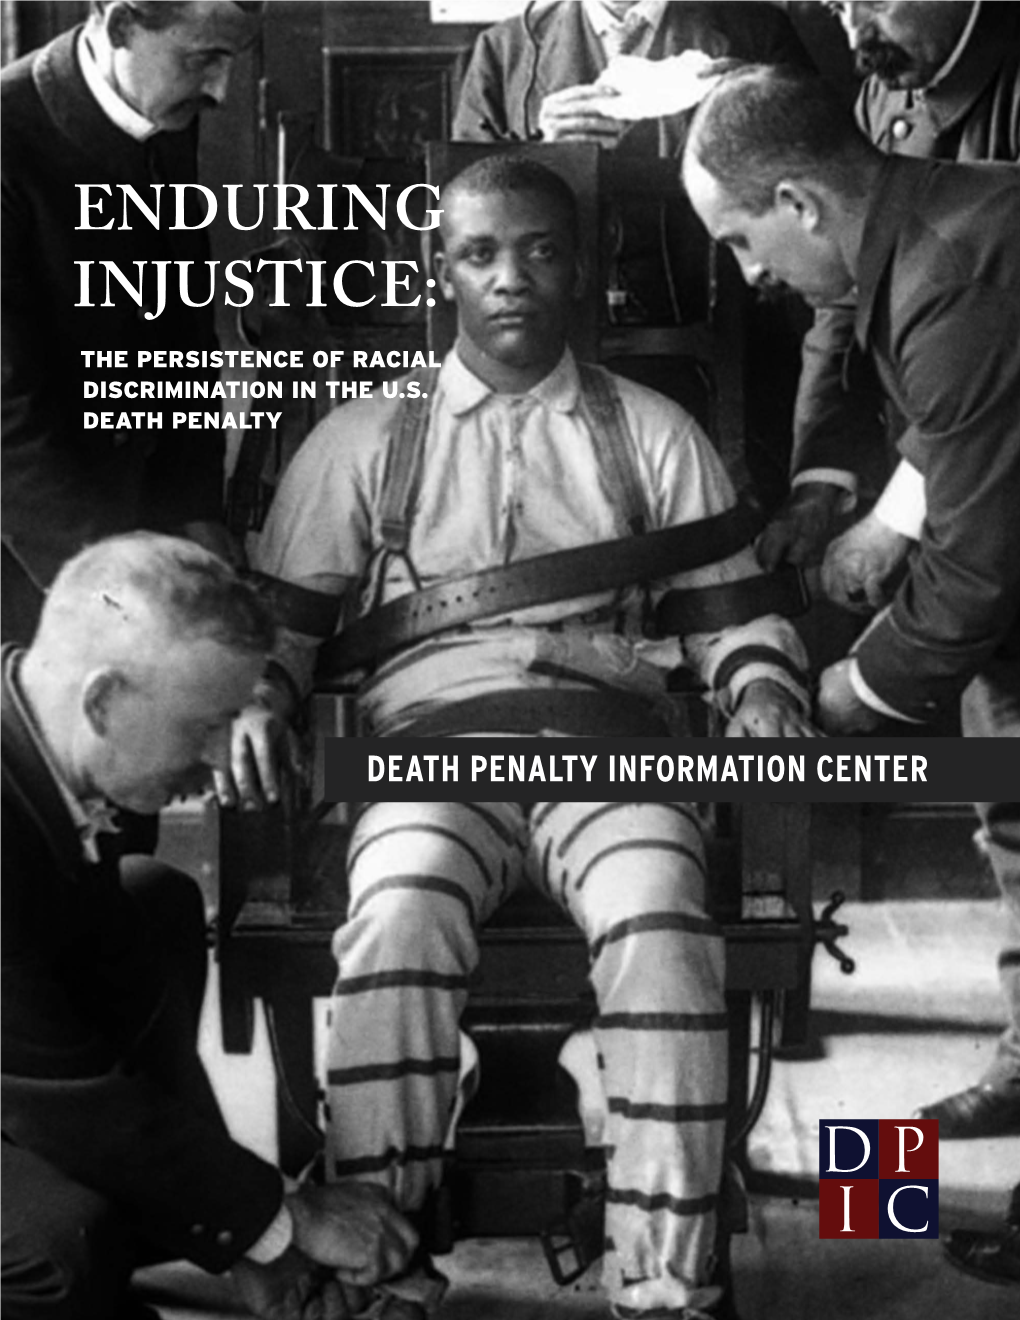 Enduring Injustice: the Persistence of Racial Discrimination in the U.S